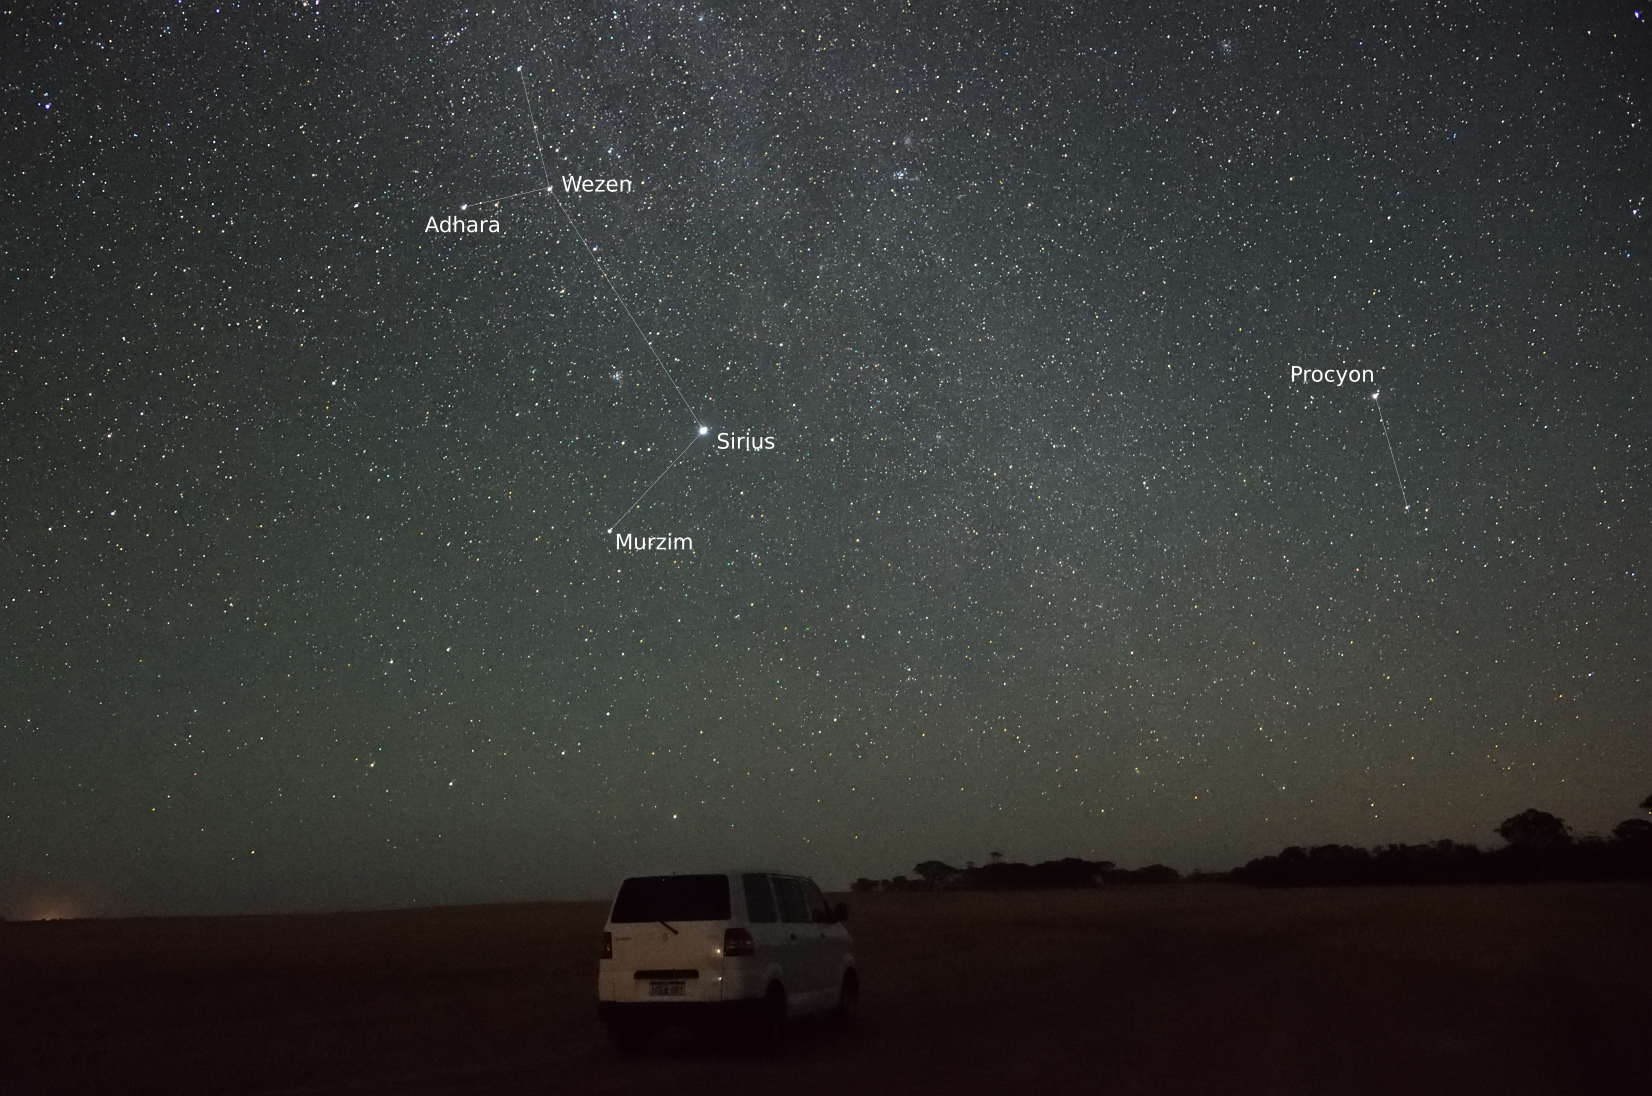 Don't Miss: Gathering Planets, the Charioteer, and “Sirius” Star Clusters!